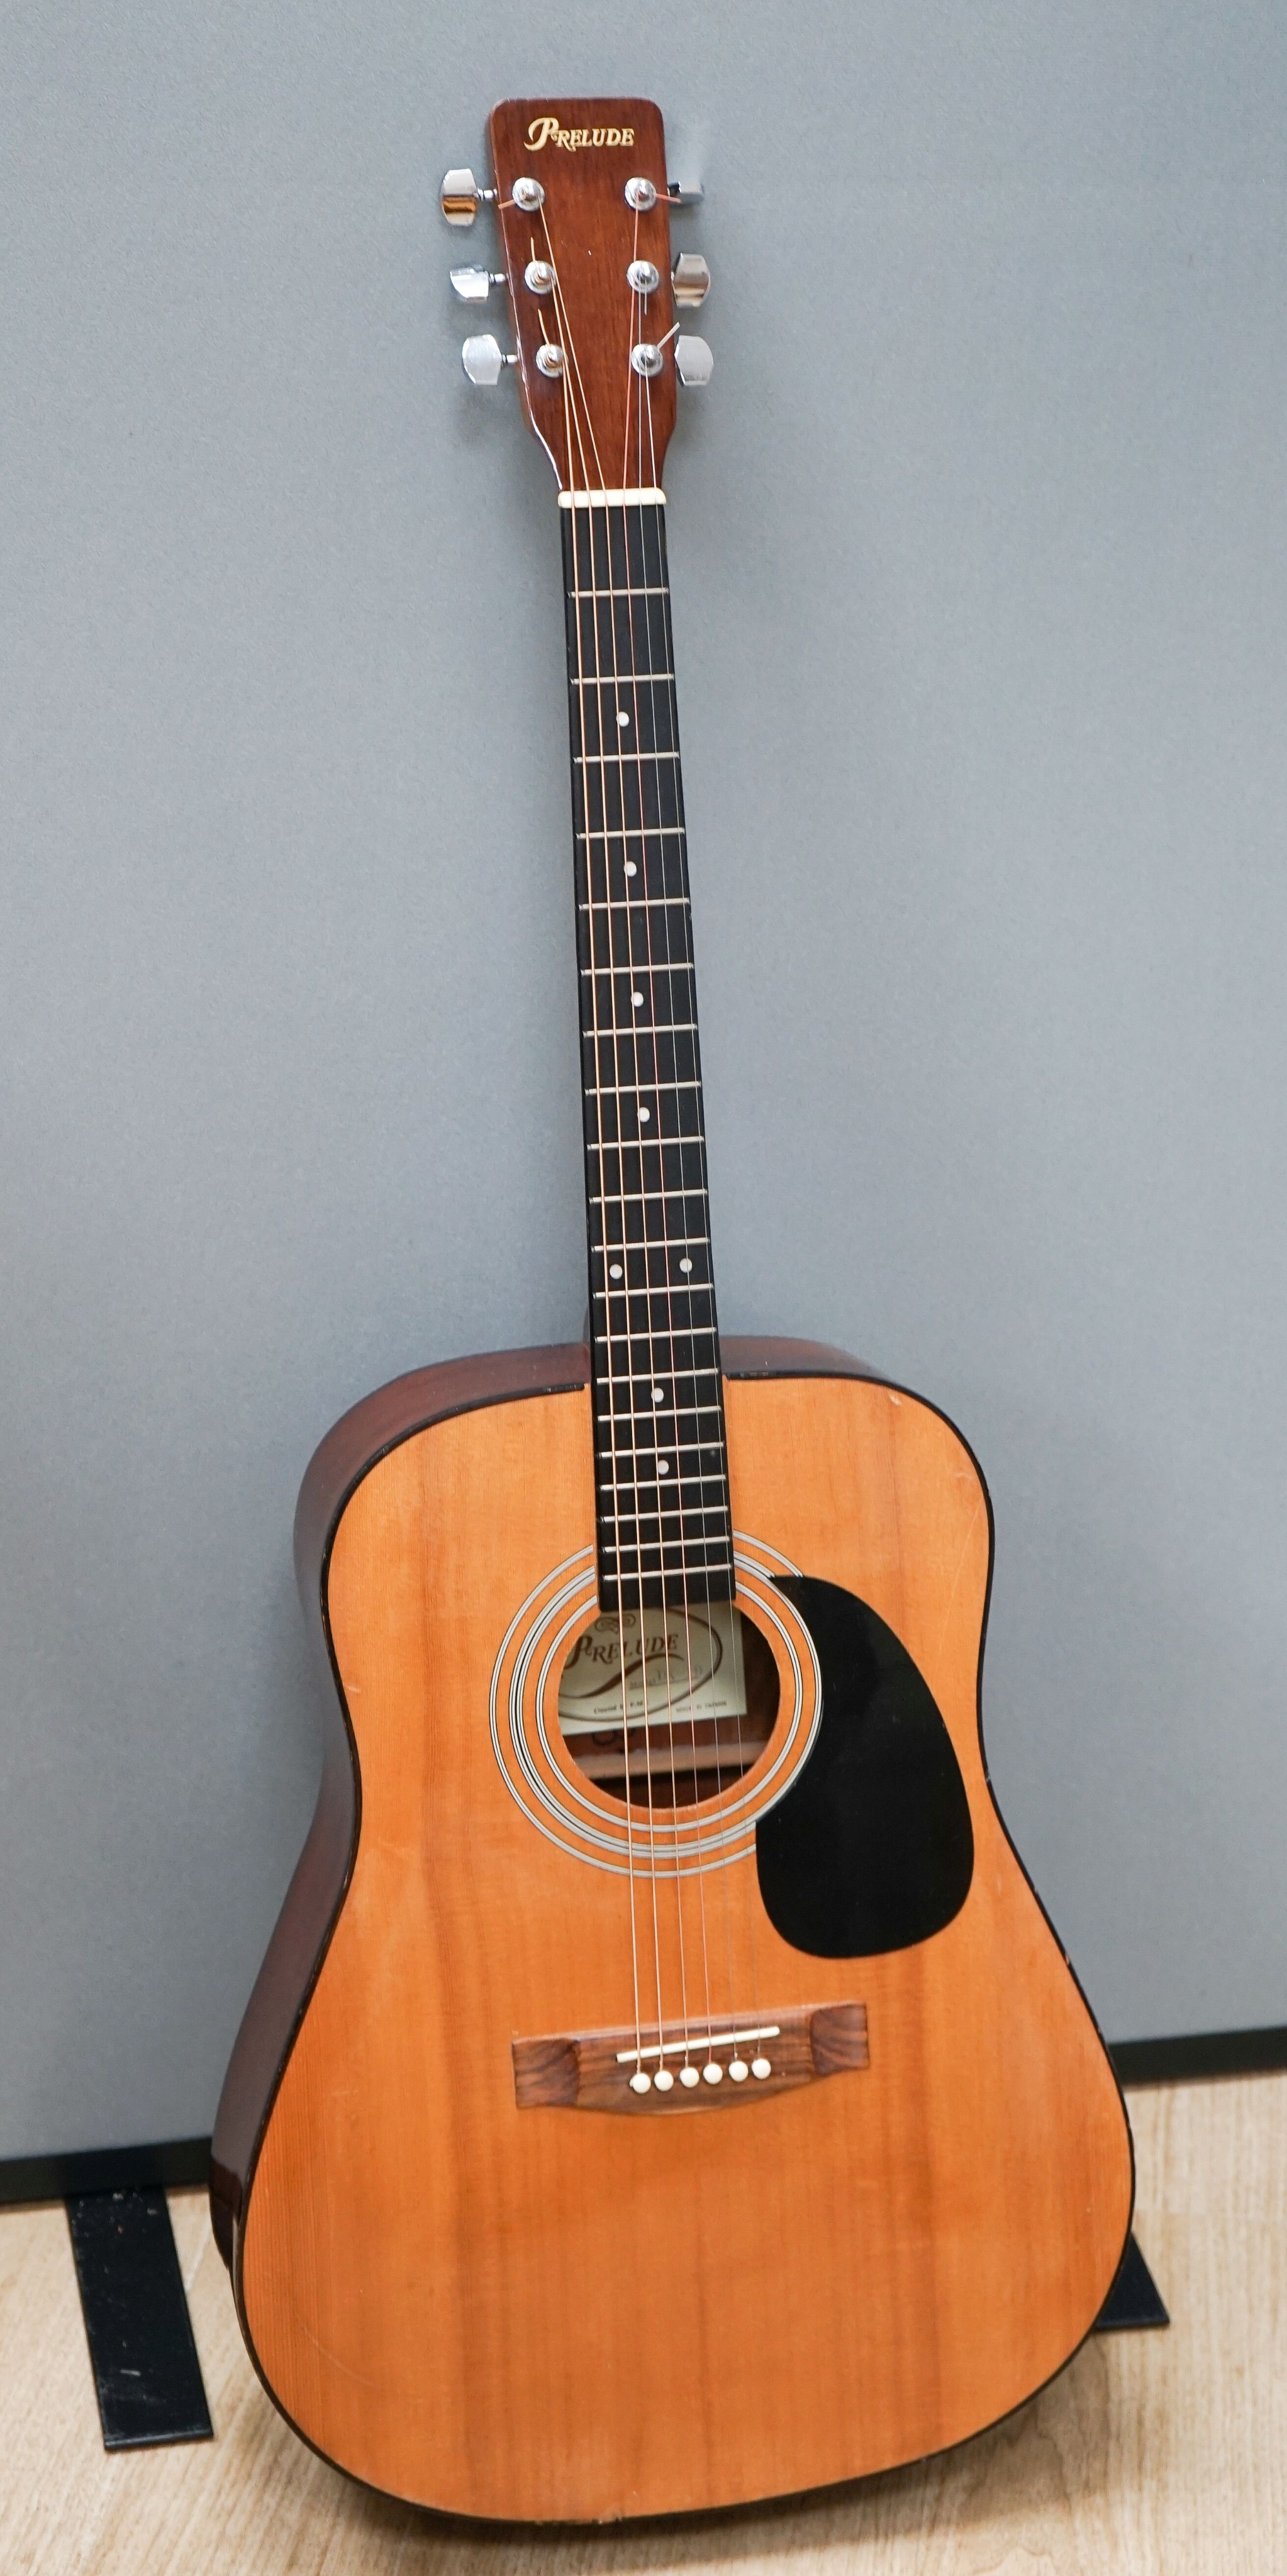 Prelude acoustic guitar DX19